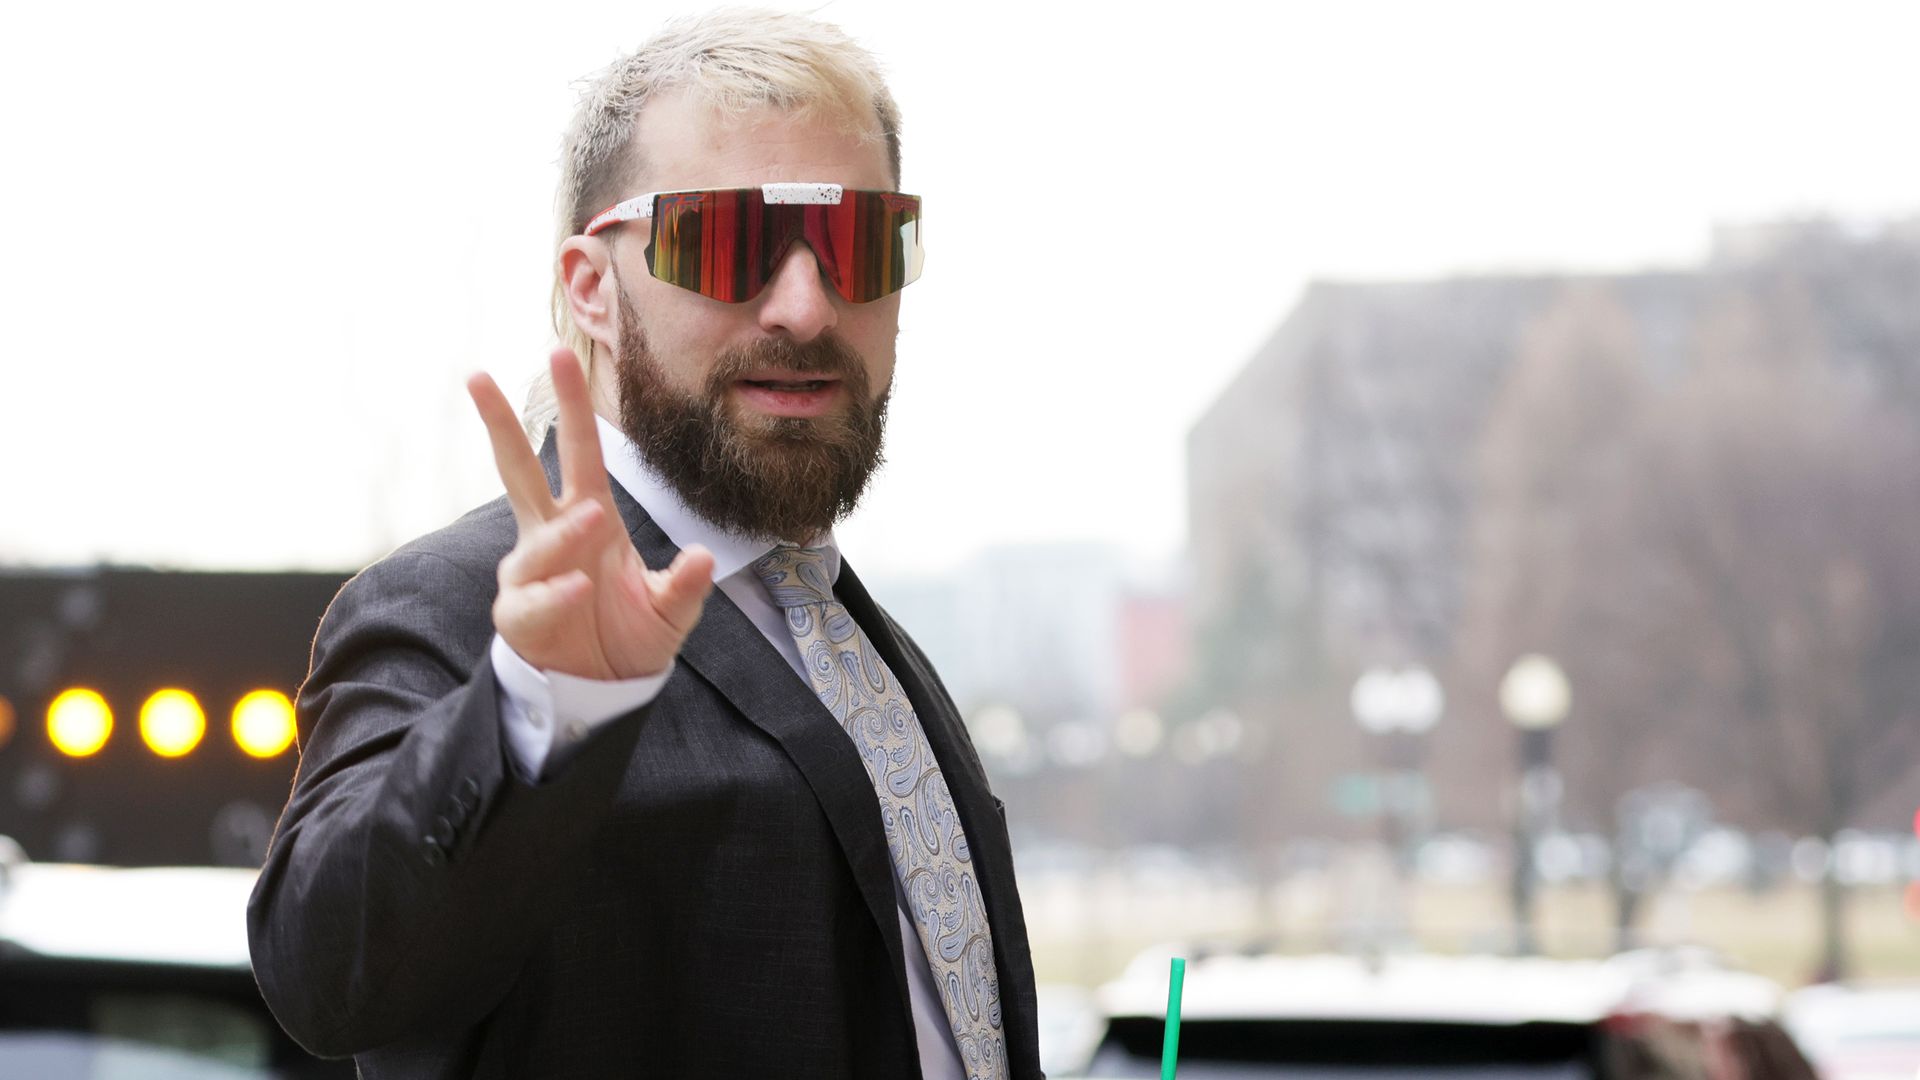 Far-right media personality Anthime Gionet, also known as Baked Alaska, arrives for his sentencing 